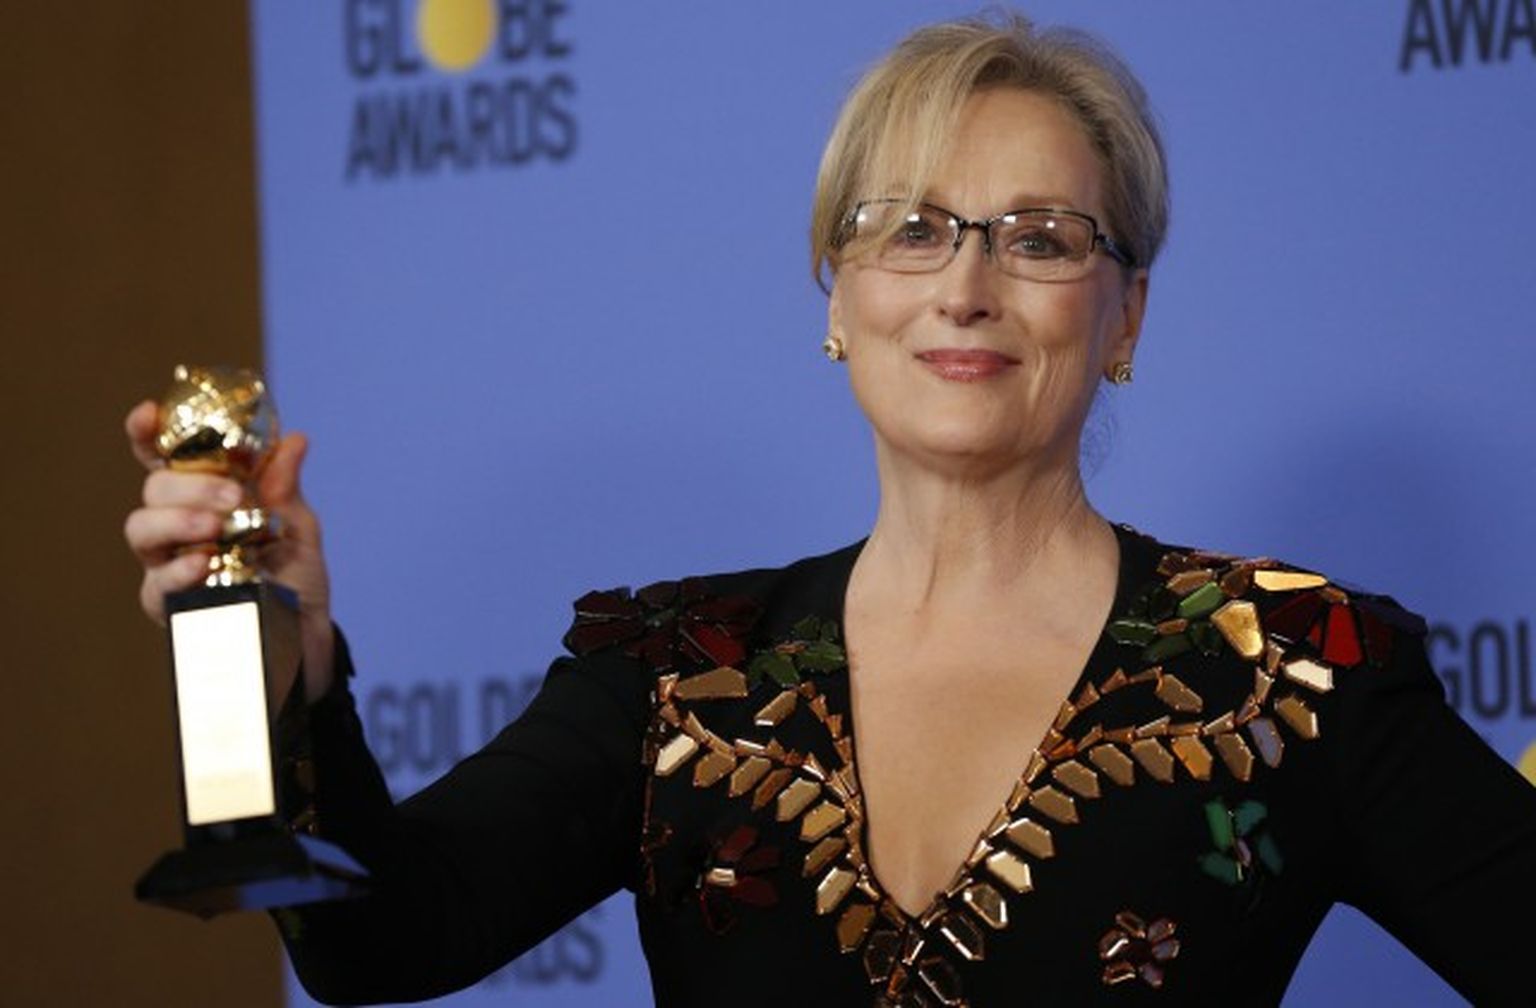 Meryl Streep holds the Cecil B. DeMille Award during the 74th Annual Golden Globe Awards in Beverly Hills, California, U.S., January 8, 2017.  REUTERS/Mario Anzuoni